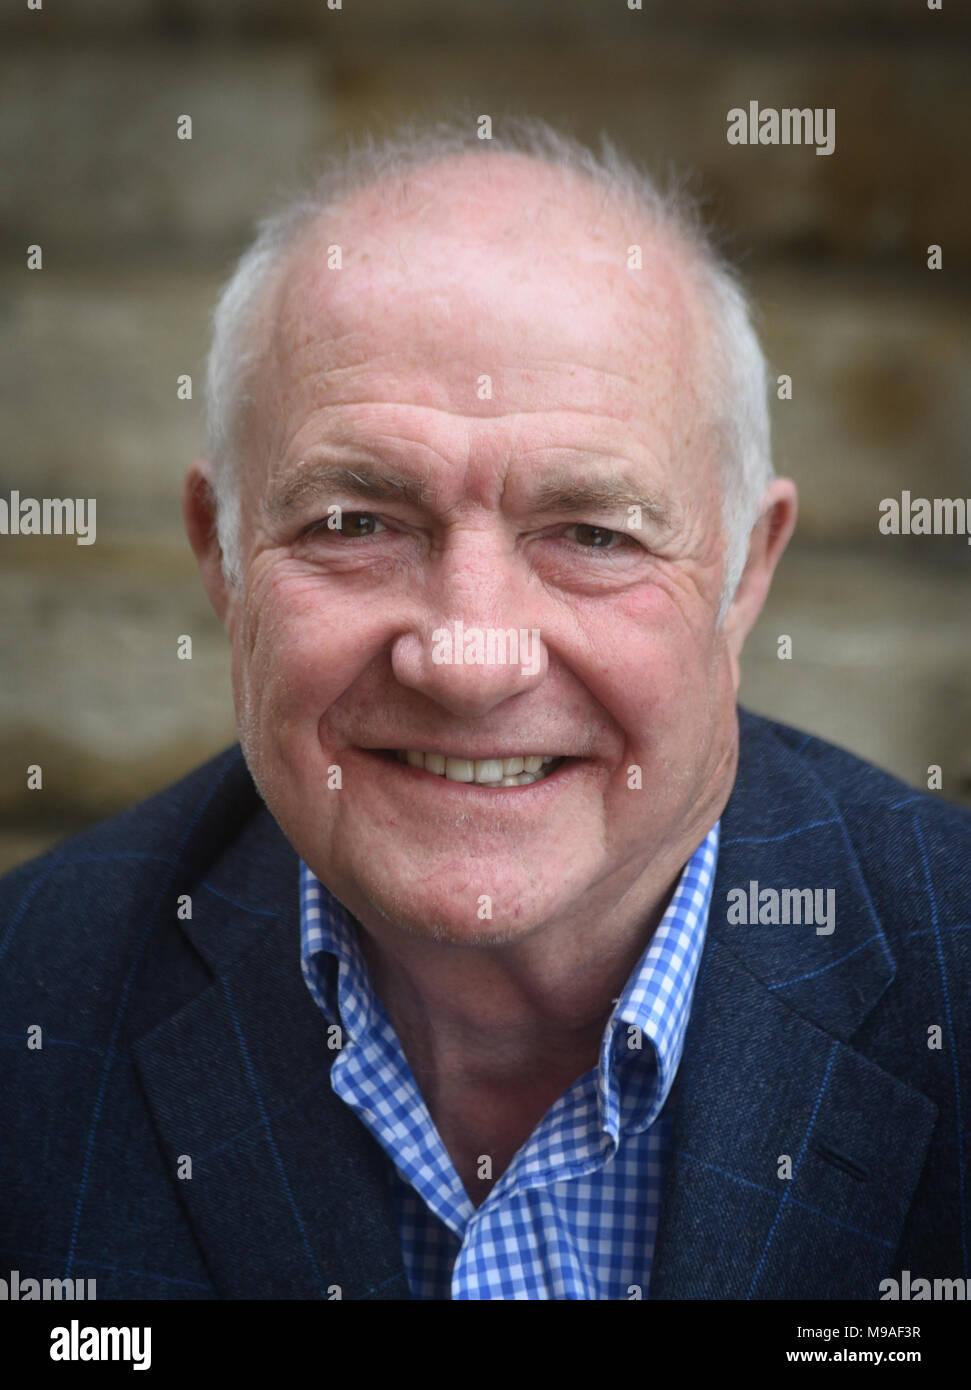 Oxford, UK. 24th march, 2018. Rick Stein at Oxford Literary Festival 24th March. Rick Stein at Sheldonian Theatre Oxford to talk about' A Life in Food' with Matthew Stadlen   Richard Cave Photography/Alamy Stock Photo